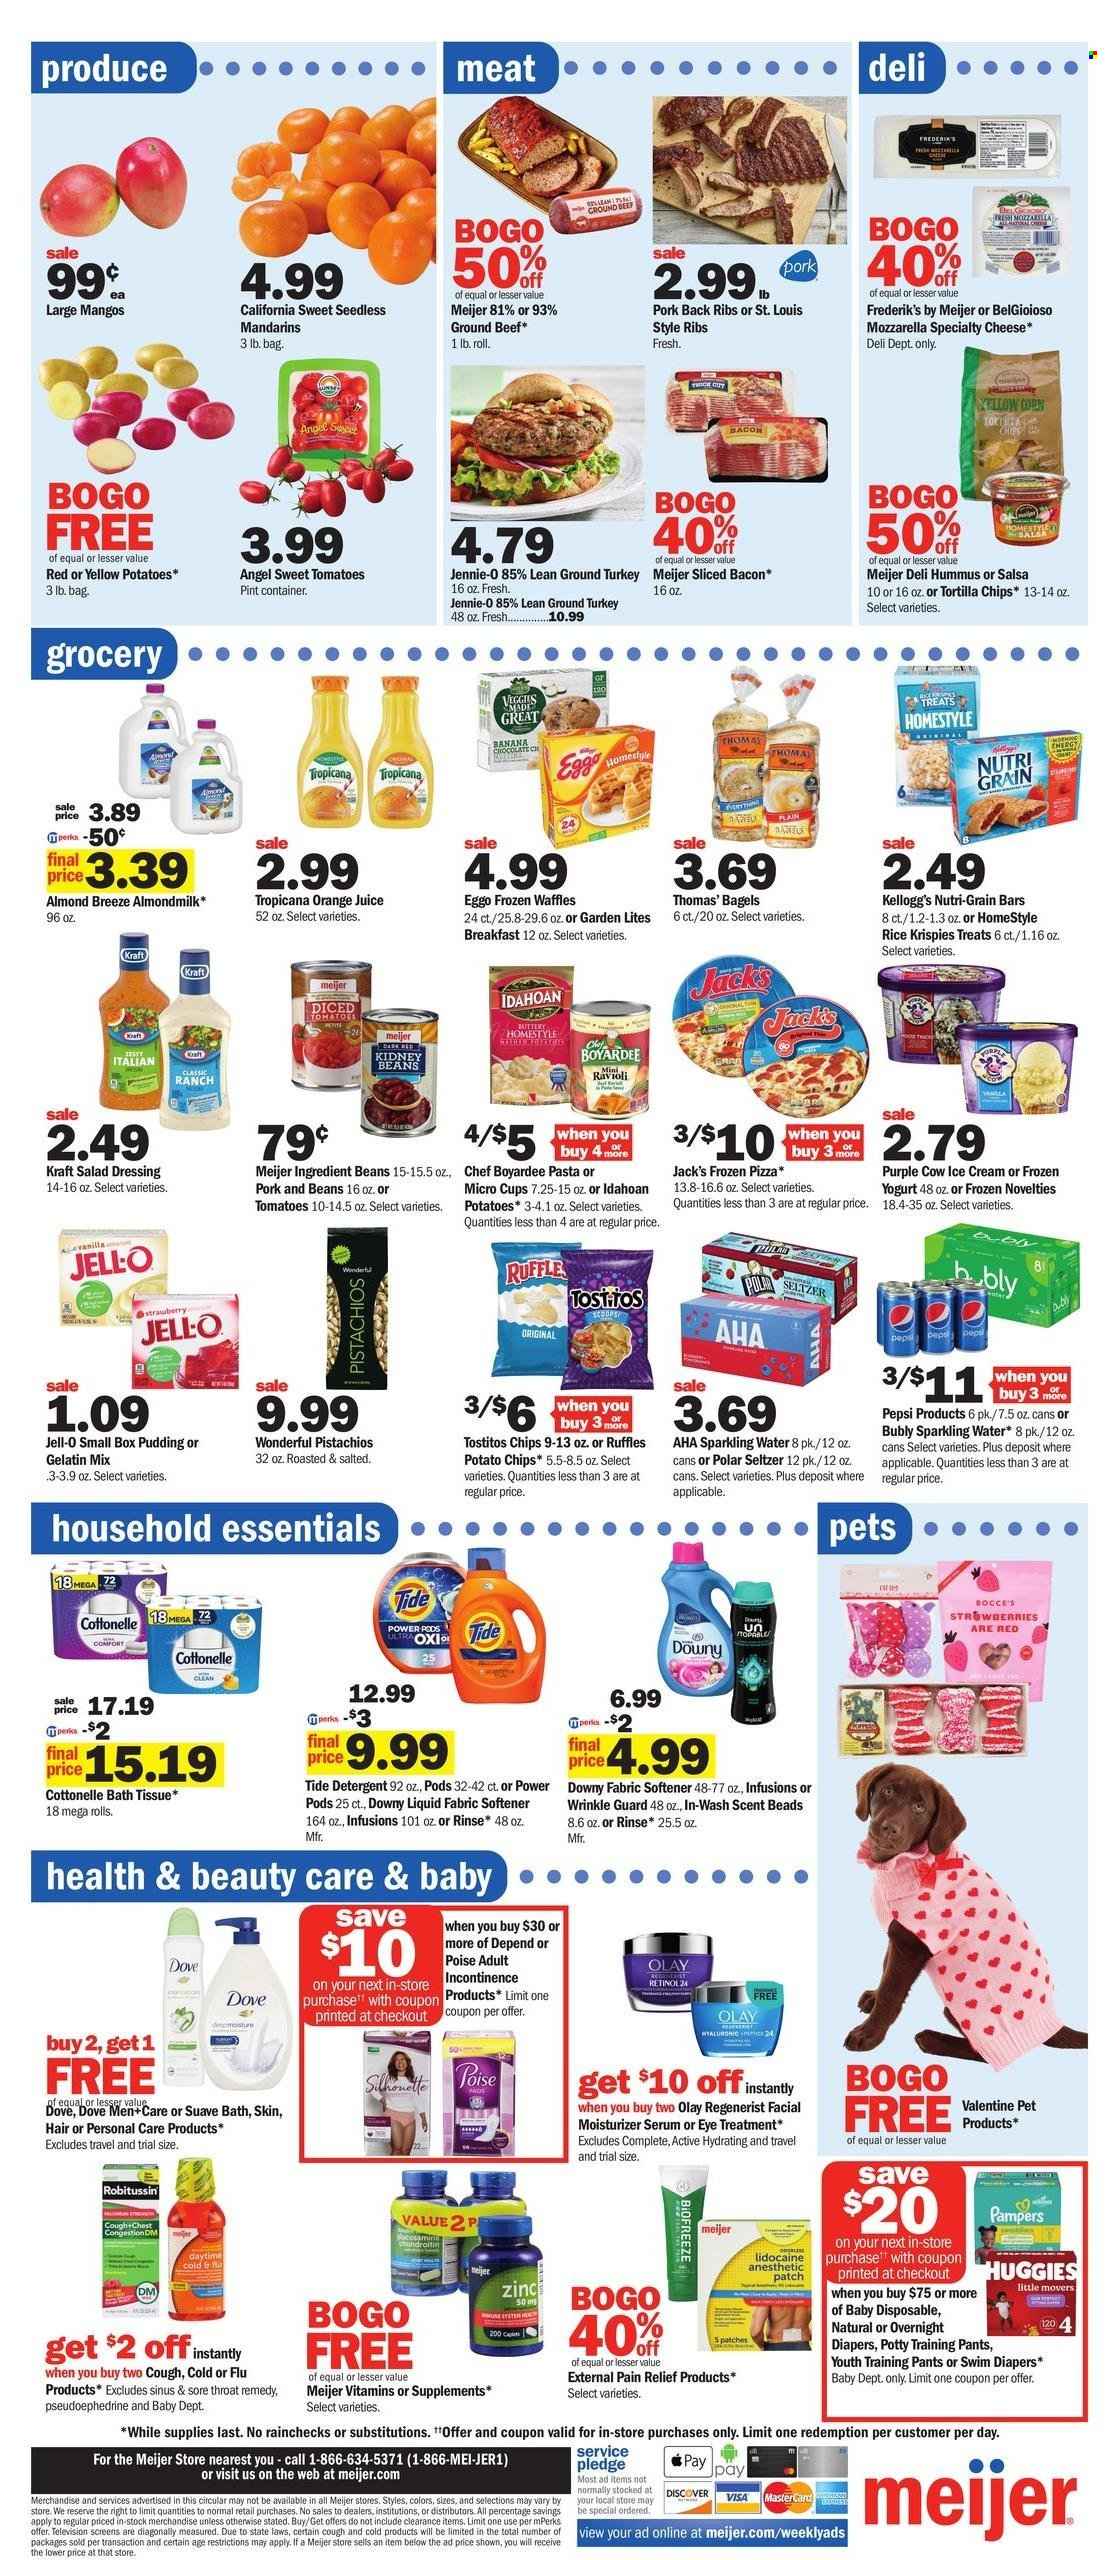 thumbnail - Meijer Flyer - 01/29/2023 - 02/04/2023 - Sales products - bagels, waffles, beans, corn, mandarines, mango, ravioli, pizza, Kraft®, bacon, hummus, pudding, yoghurt, almond milk, Almond Breeze, ice cream, Dove, Kellogg's, Nutri-Grain bars, tortilla chips, potato chips, Ruffles, Tostitos, Jell-O, Chef Boyardee, Rice Krispies, Nutri-Grain, salad dressing, dressing, salsa, pistachios, Pepsi, orange juice, juice, seltzer water, sparkling water, ground turkey, beef meat, ground beef, ribs, pork meat, pork ribs, pork back ribs, Huggies, Pampers, pants, nappies, baby pants, bath tissue, Cottonelle, detergent, Pledge, Tide, fabric softener, Downy Laundry, Suave, moisturizer, serum, Olay, cup, container, Robitussin, pain relief. Page 10.